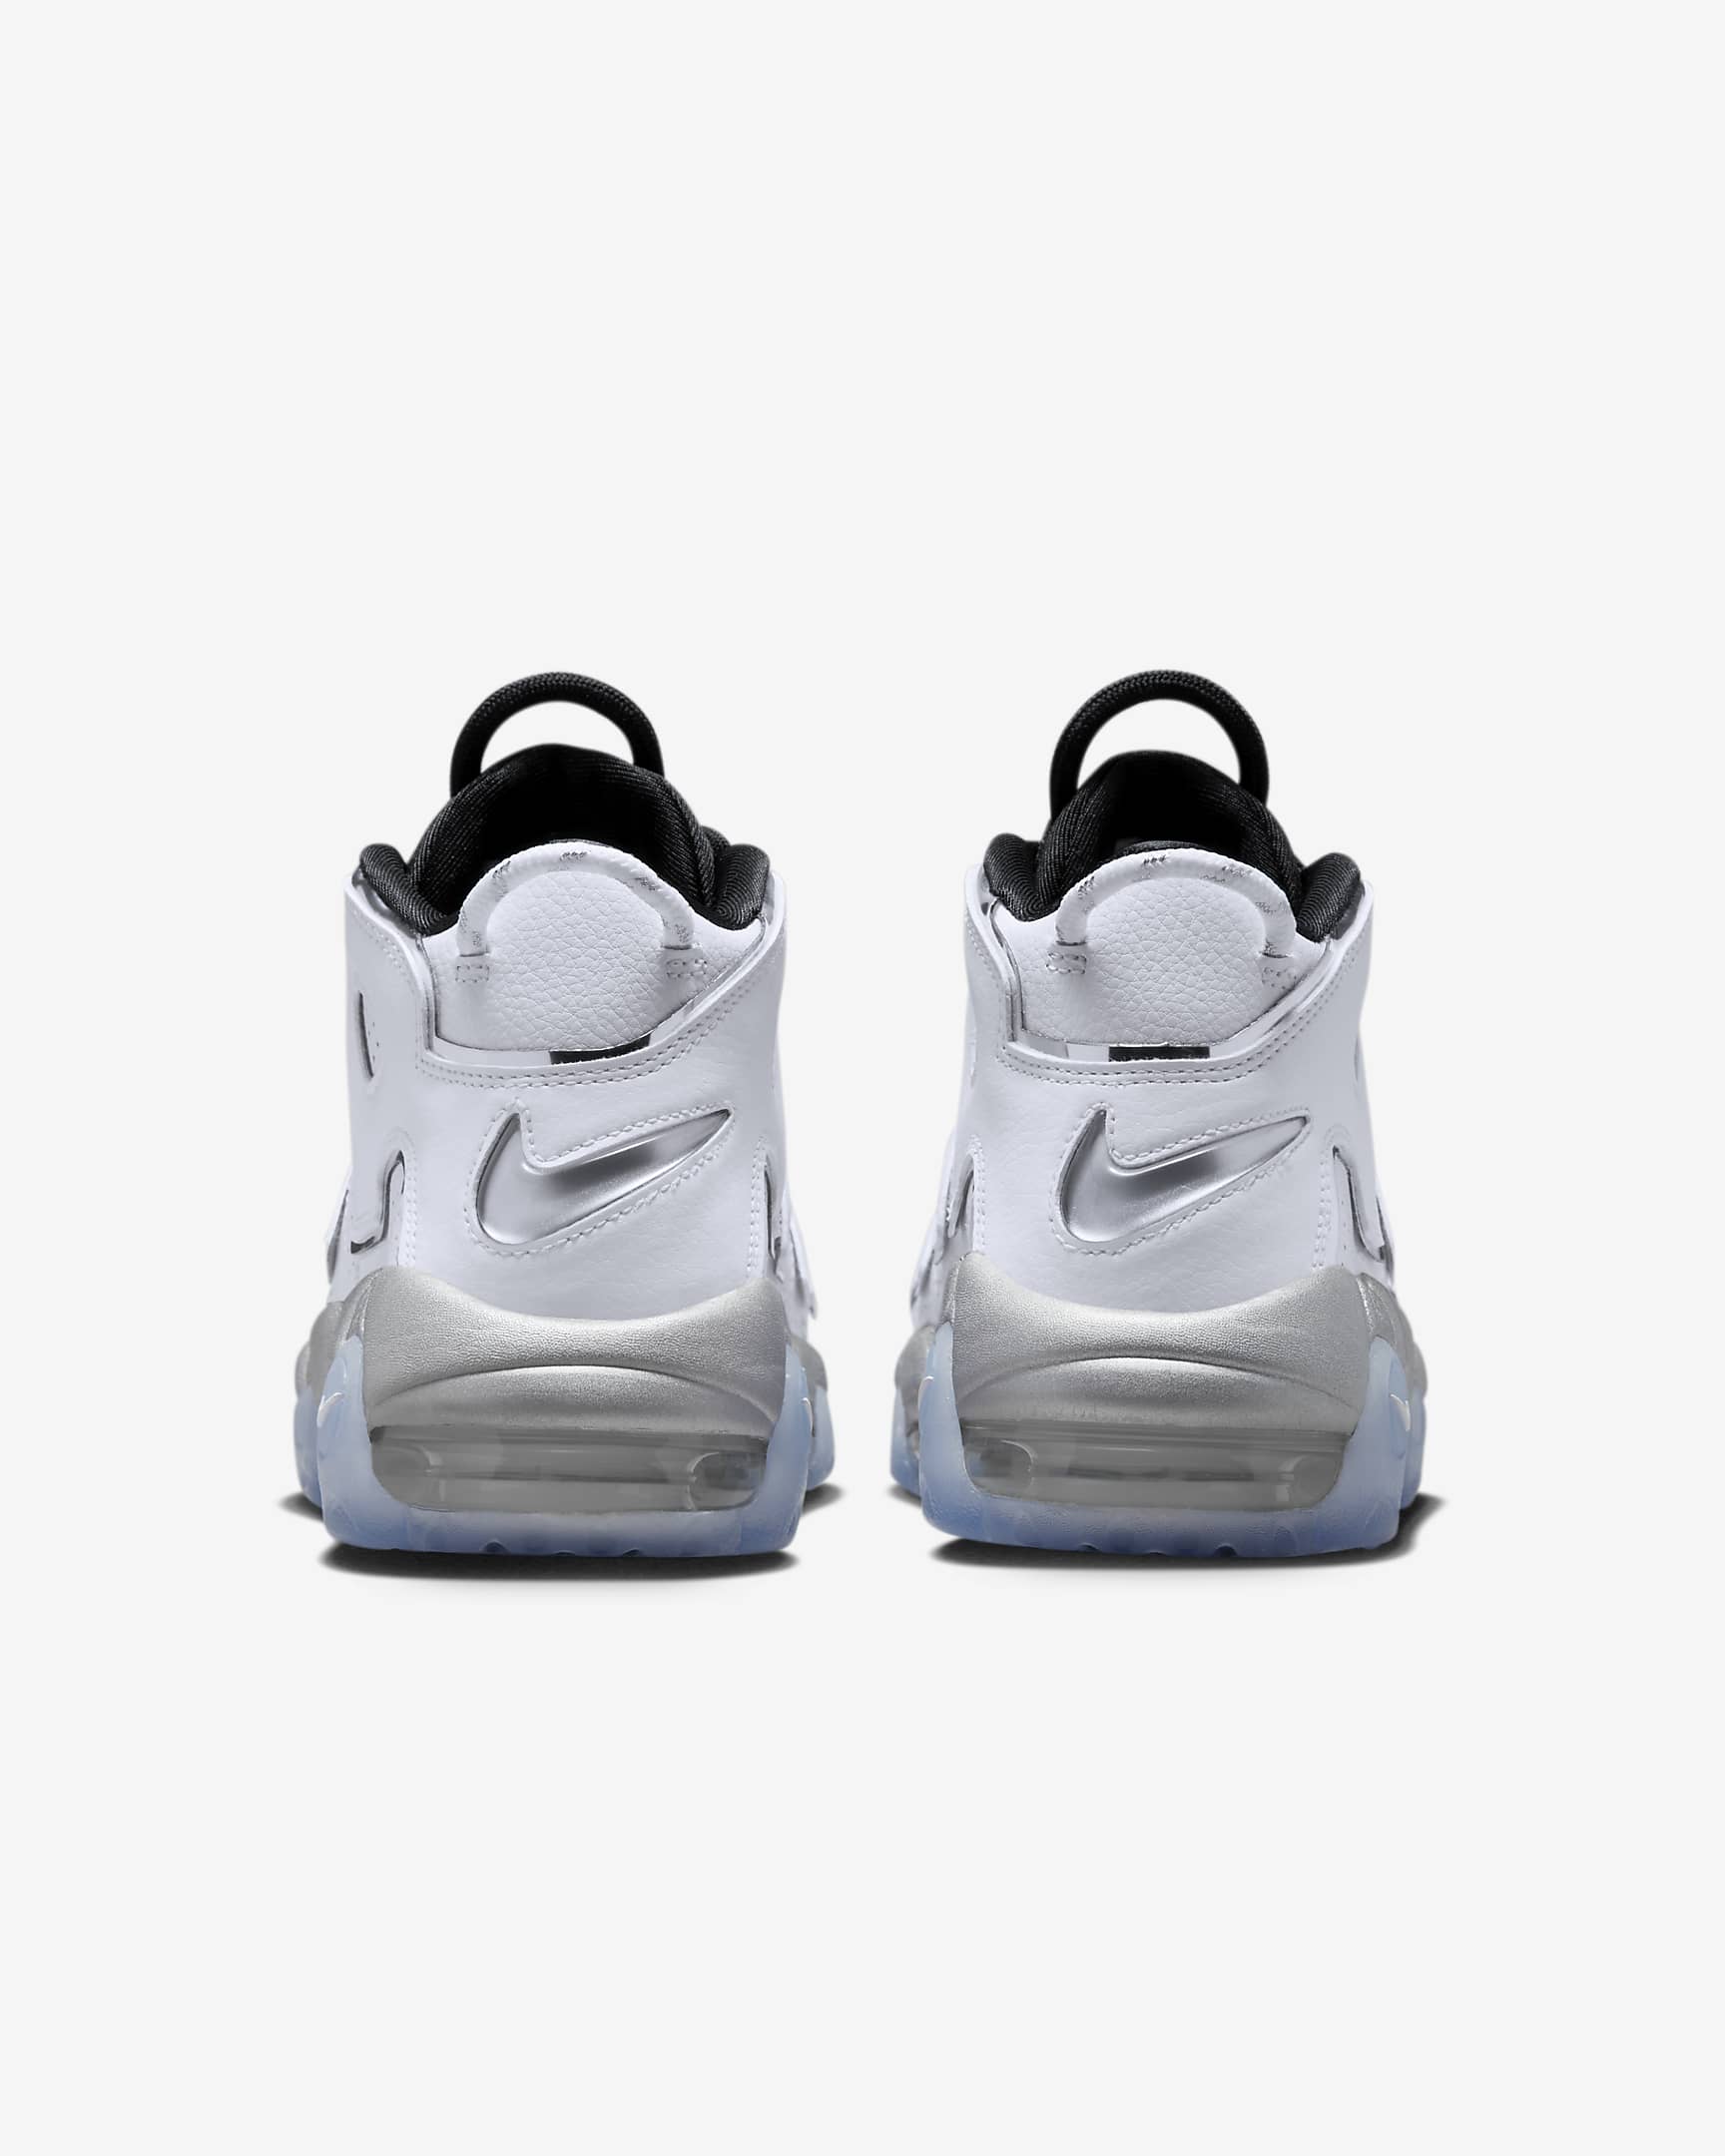 Nike Air More Uptempo SE Women's Shoes. Nike AT